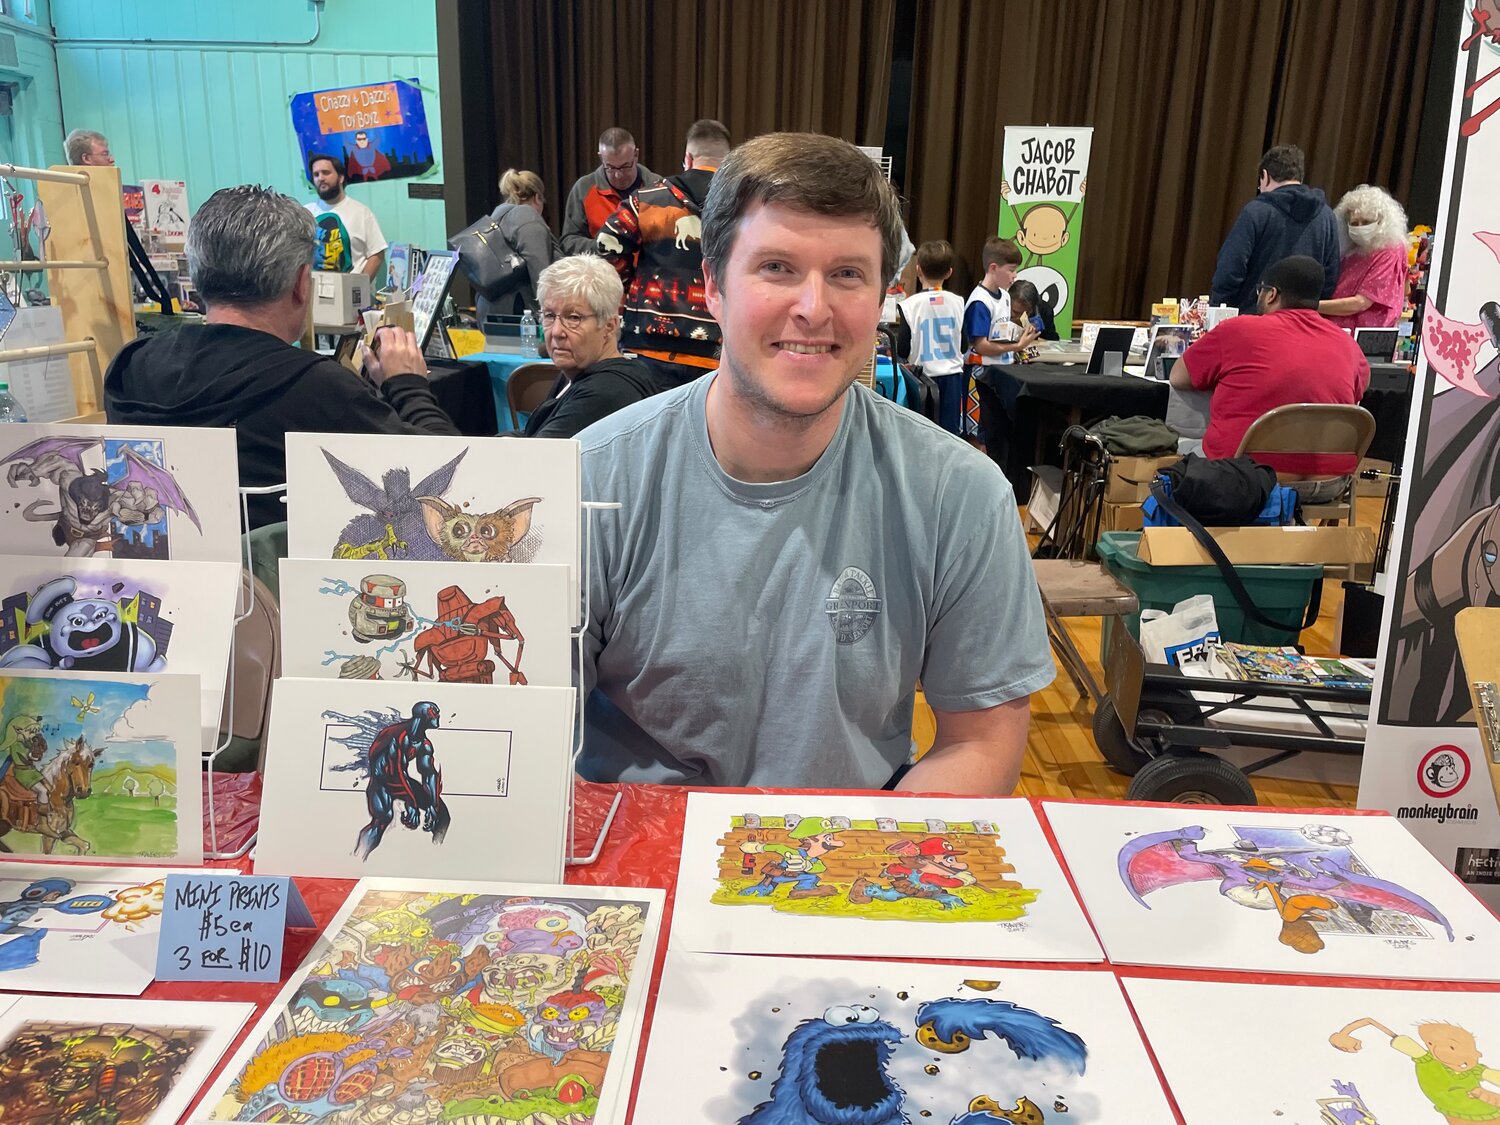 Tom Travers fell in love with drawing when he was a kid, and wanted to become a professional. Now he self-publishes his own comic series. At conventions like HurriCon, he said, he shares his passion with other people.